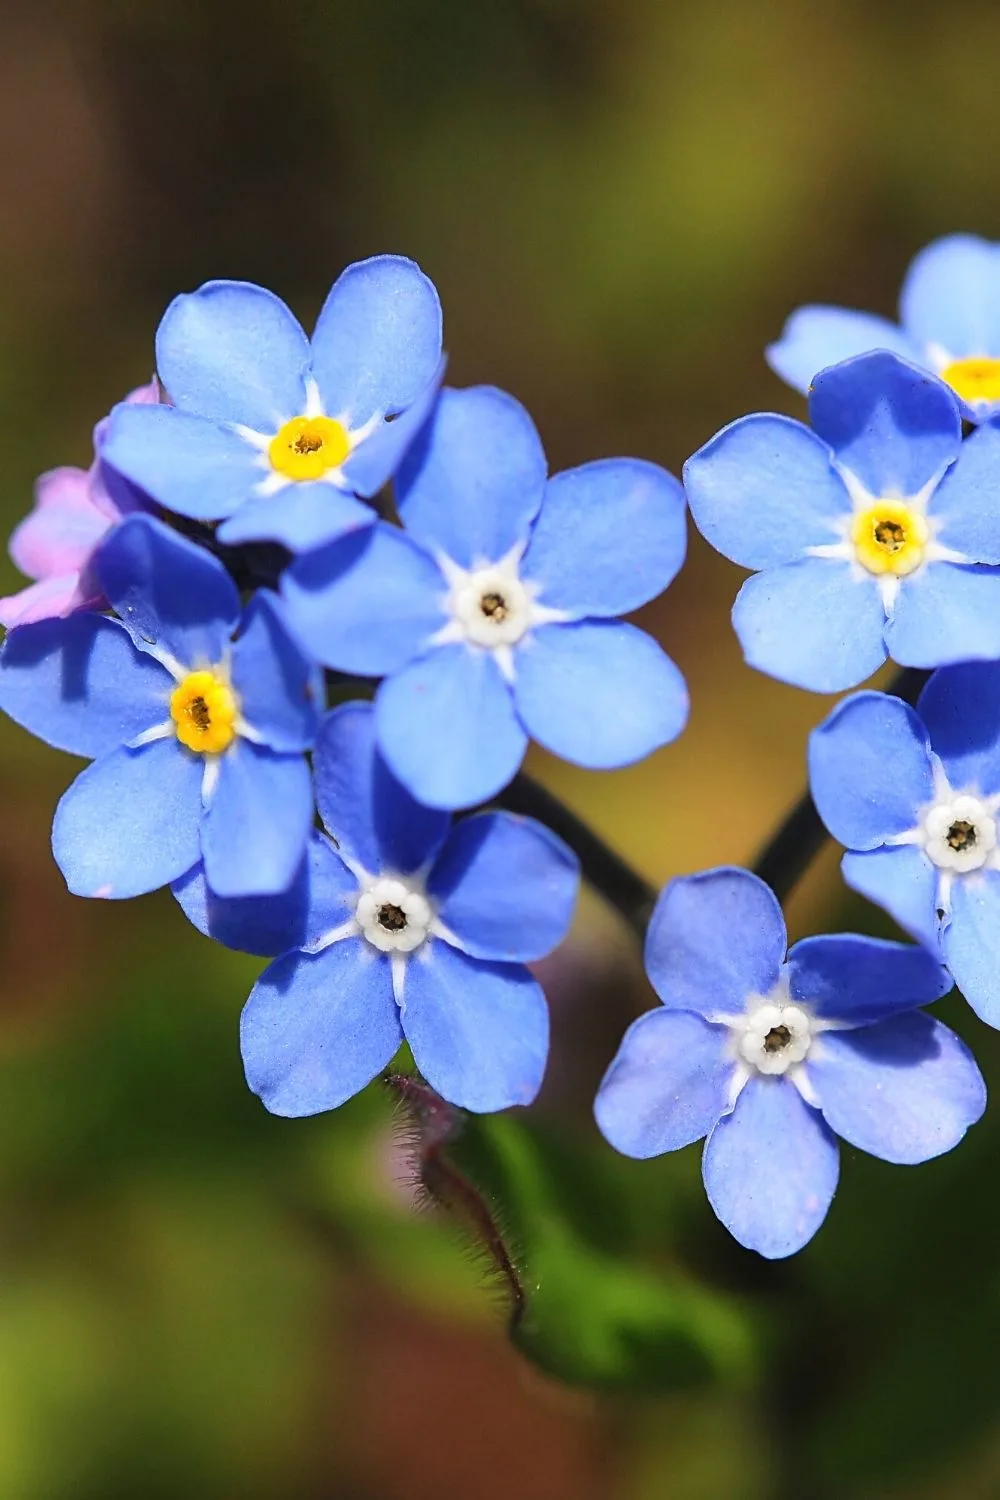 Forget Me Not, known for its captivating flowers, is a great addition to your north-facing balcony